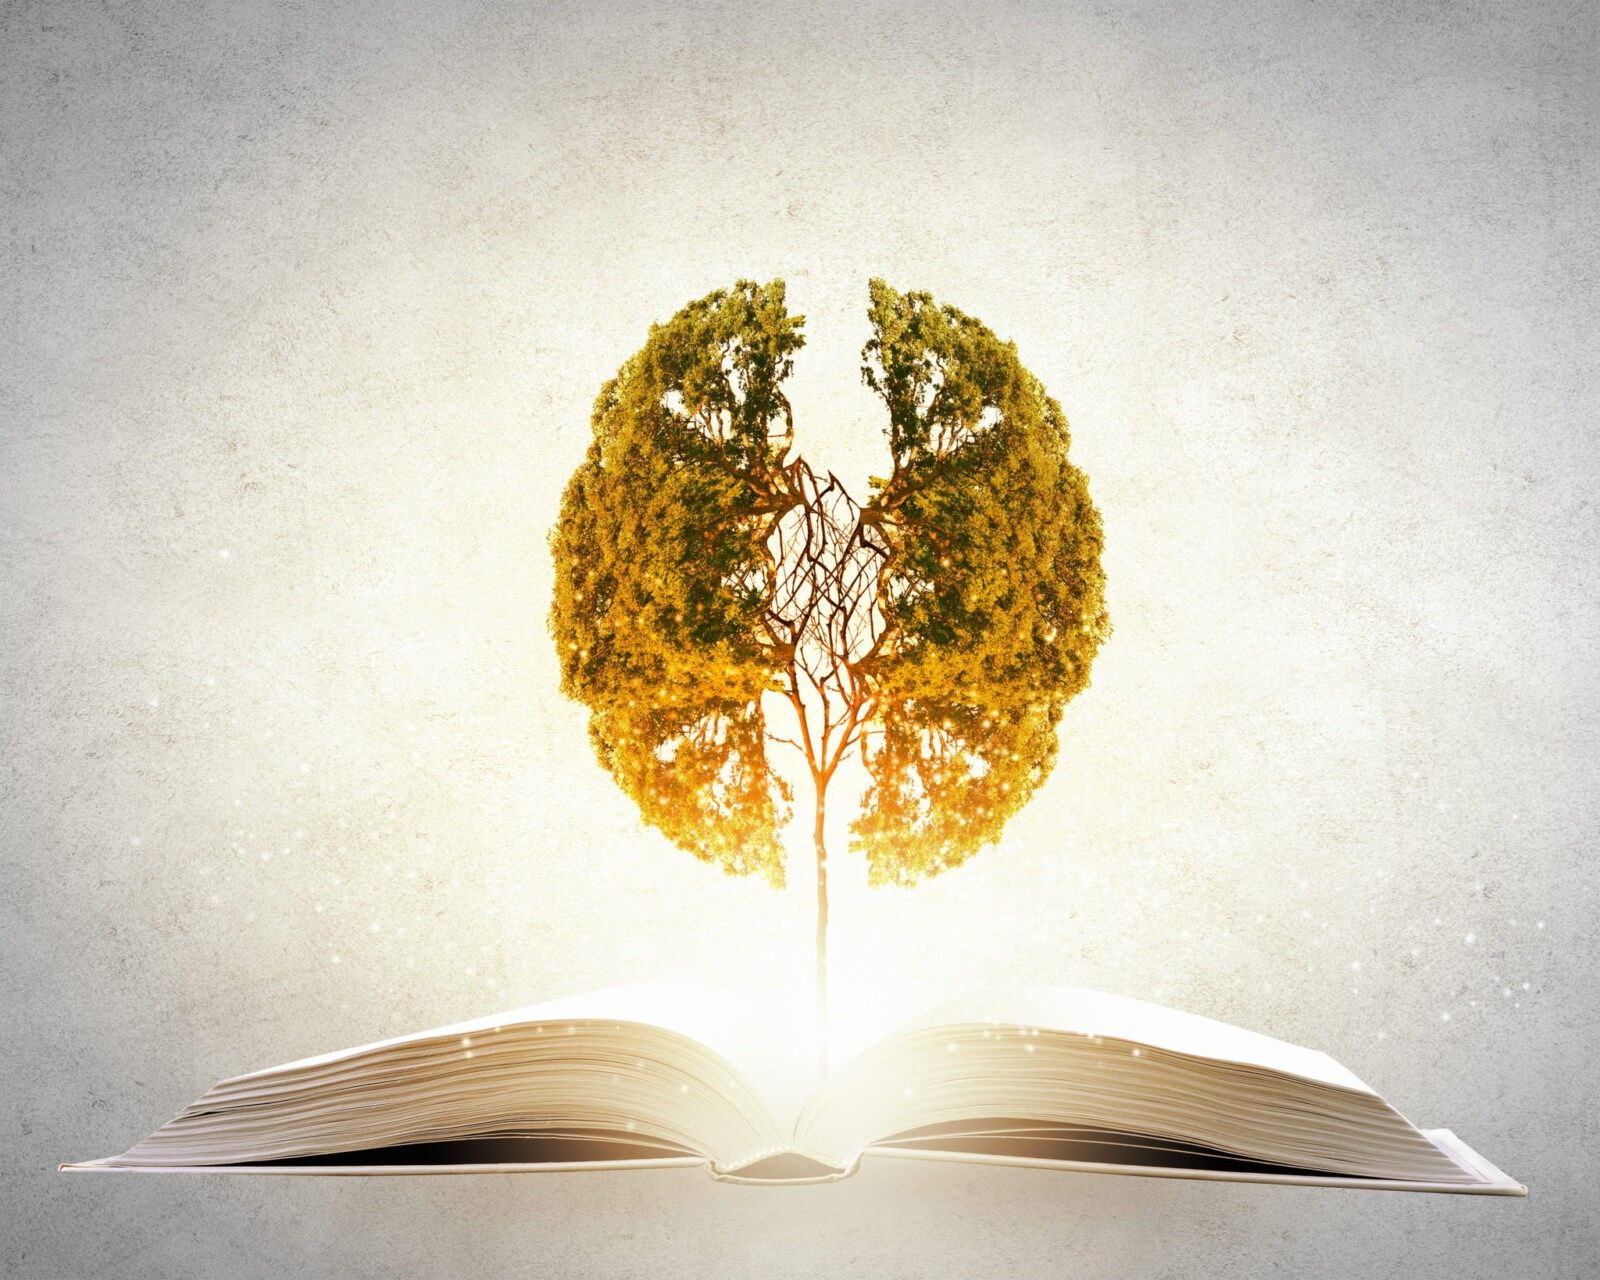 Reading and brain health